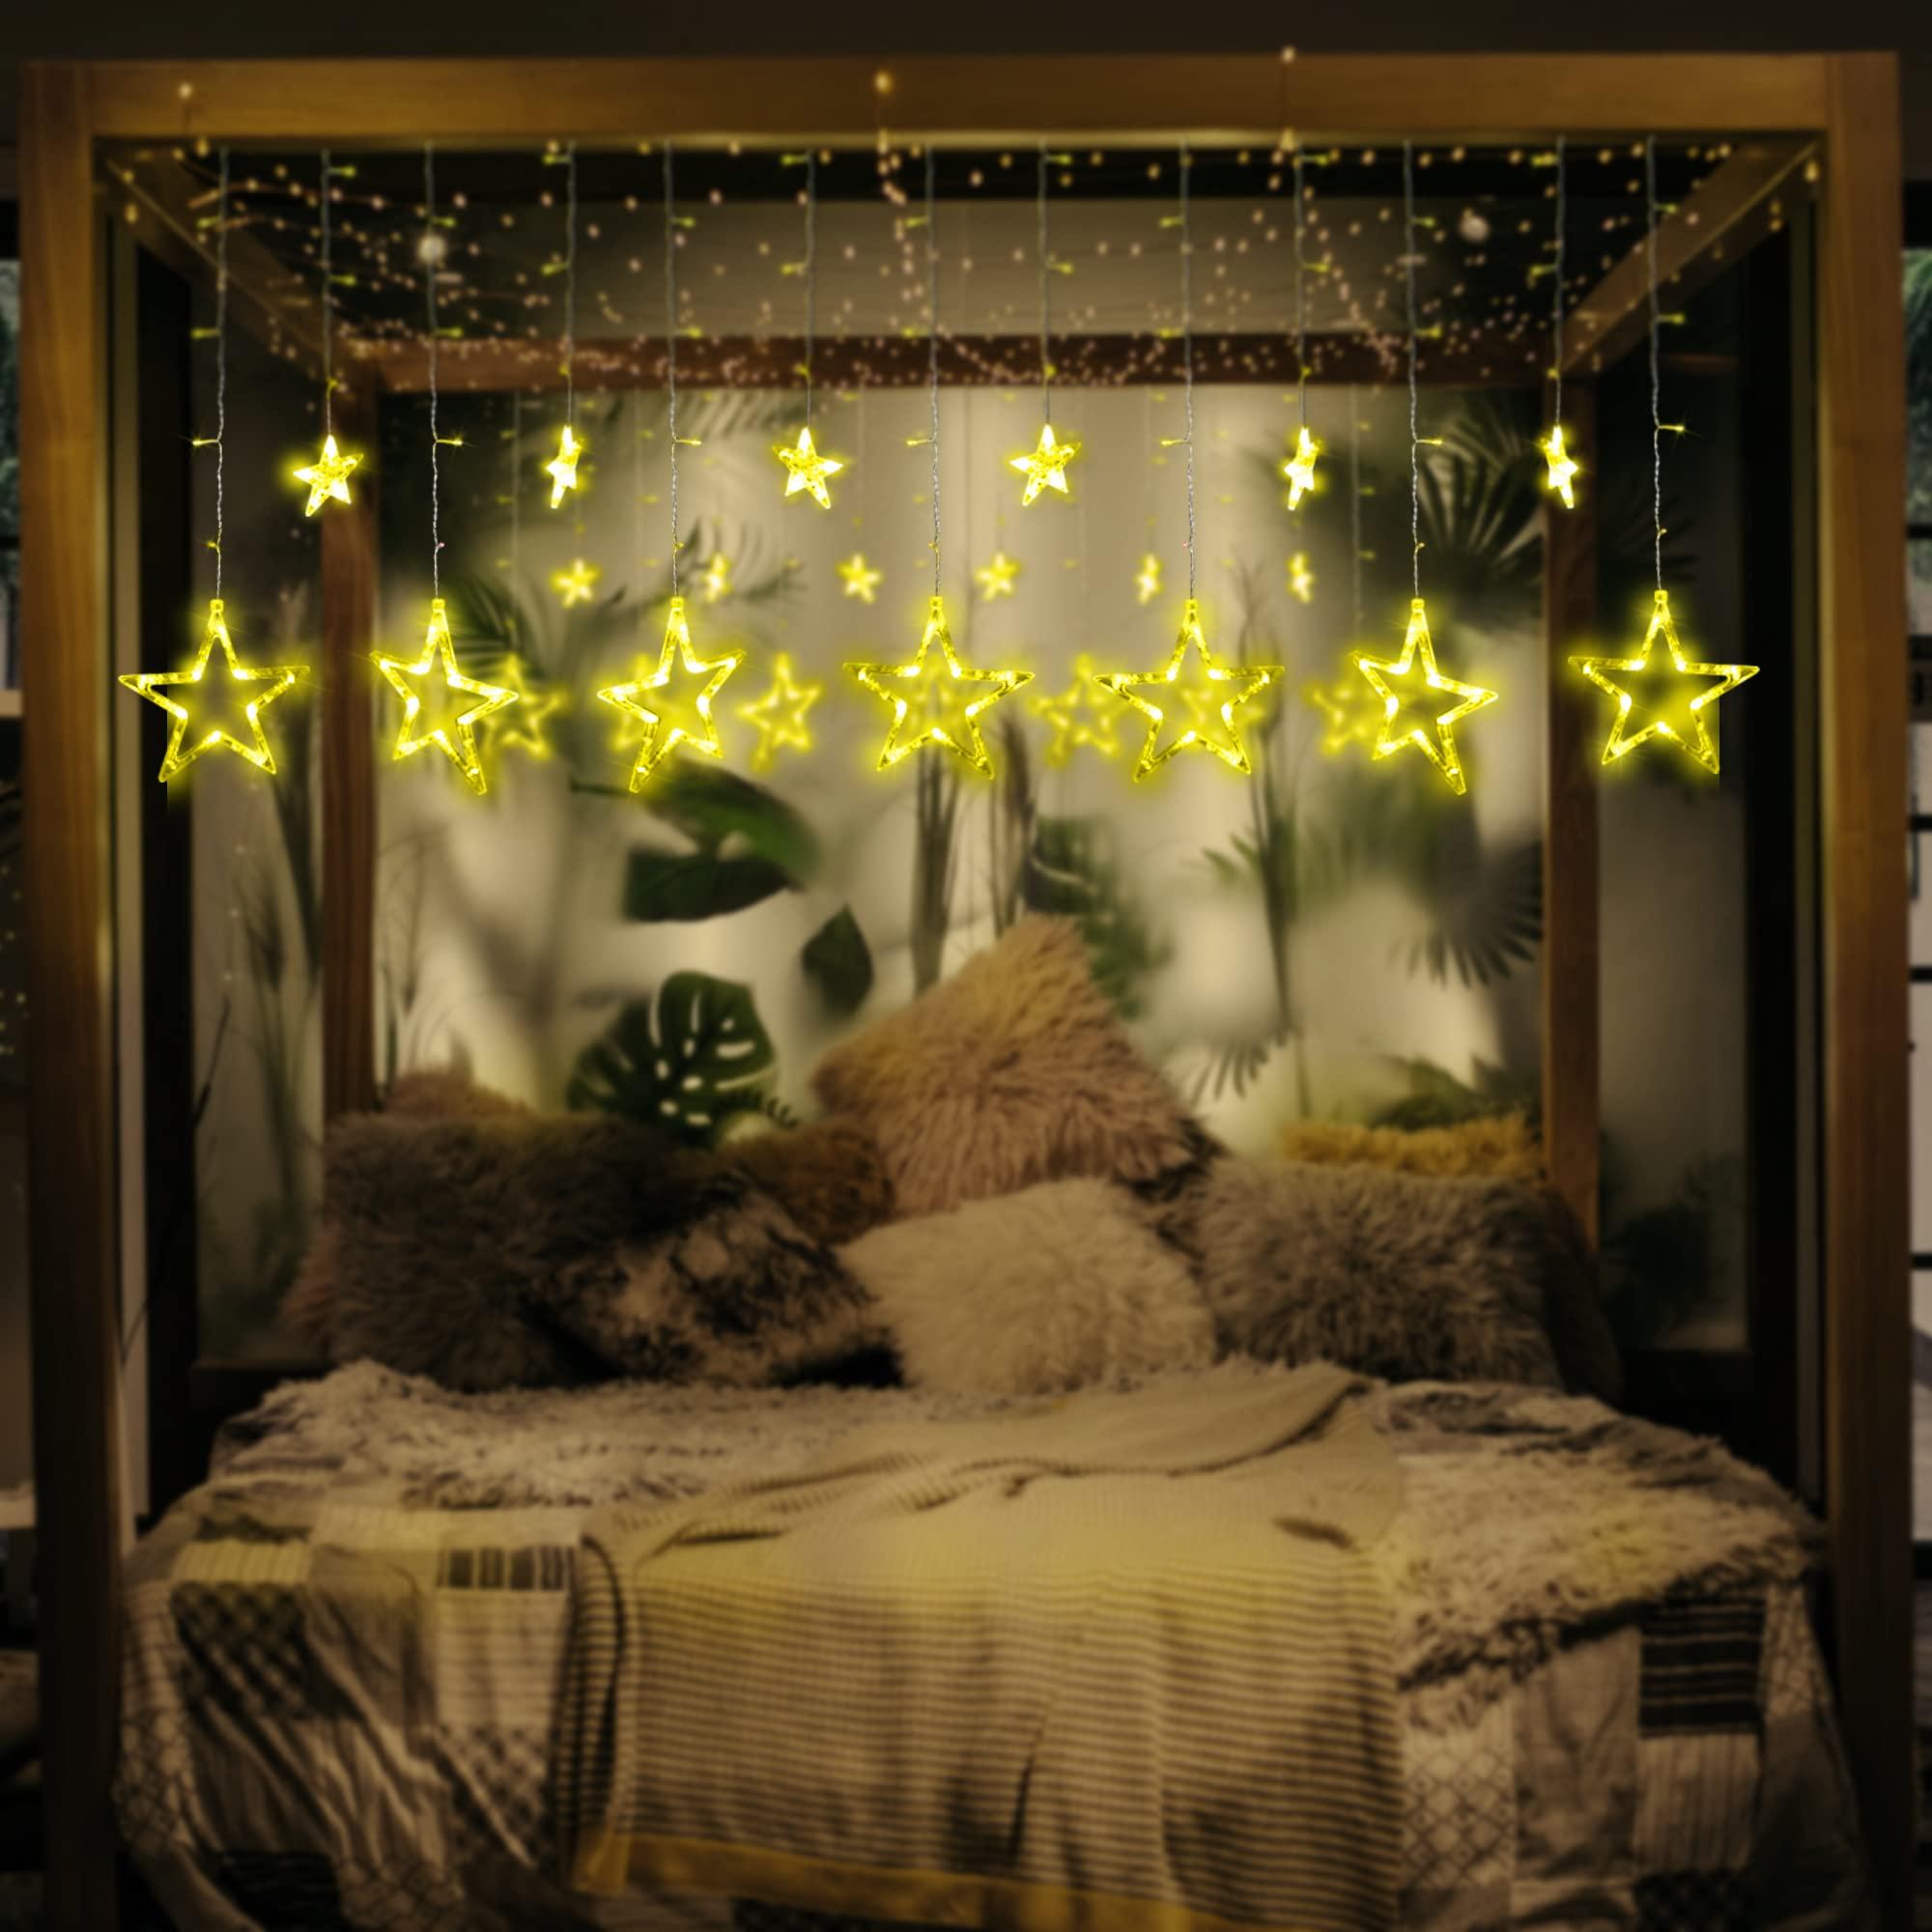 12 Star Curtain Lights with Remote Control 138 LEDs Fairy Light 8 Lighting Modes USB Powered for Bedroom Garden Party Wedding Christmas, Ideale Gift for Family Friends (Warm White) 3